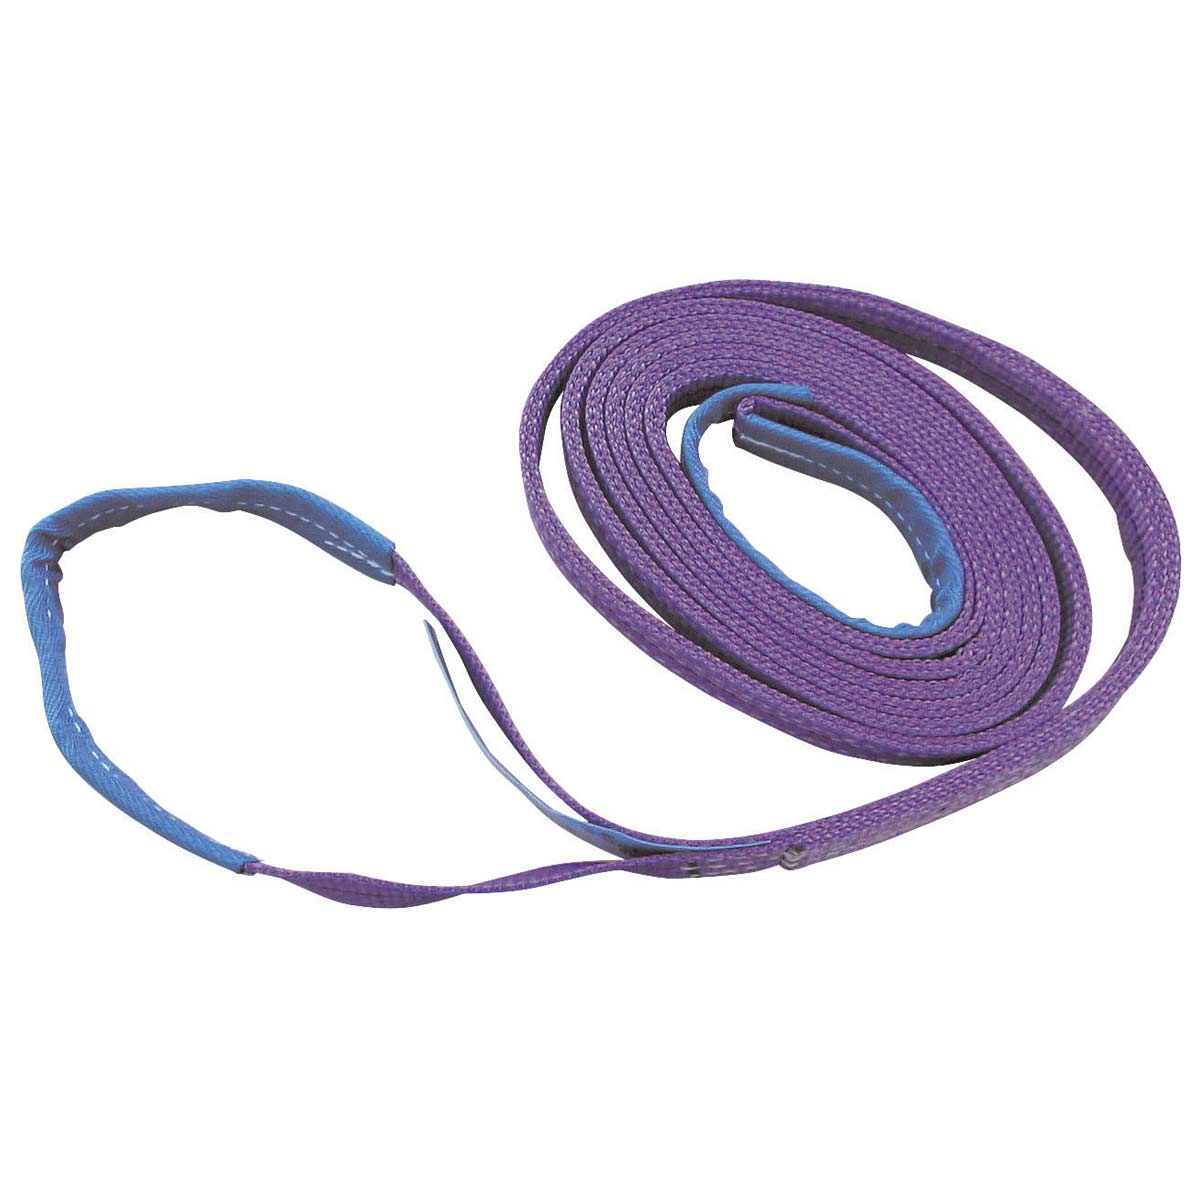 Lifting belt double-layer 2 m x 35 mm